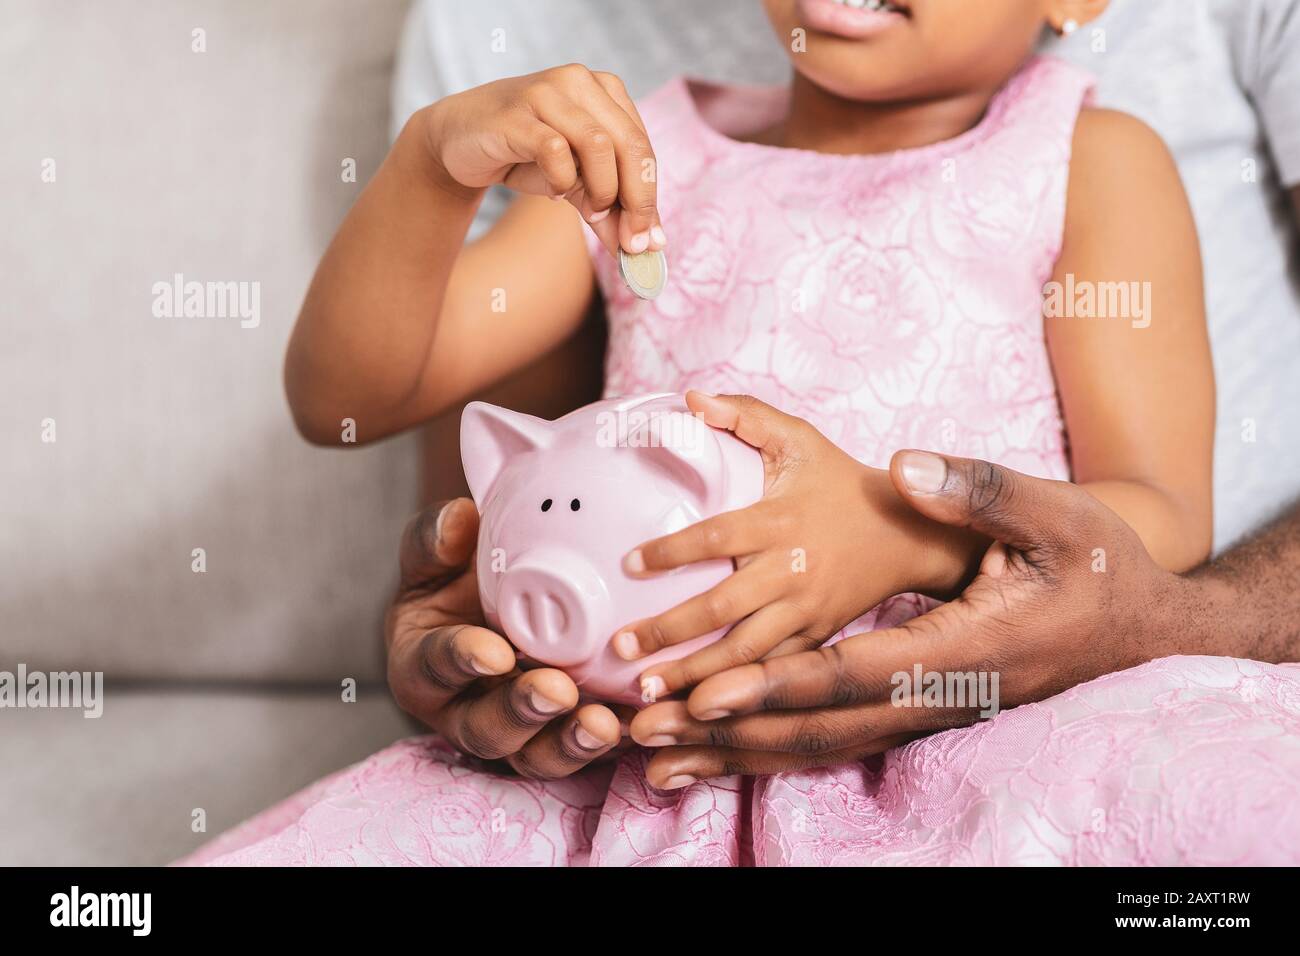 Cropped of little girl putting coins in piggy bank Stock Photo